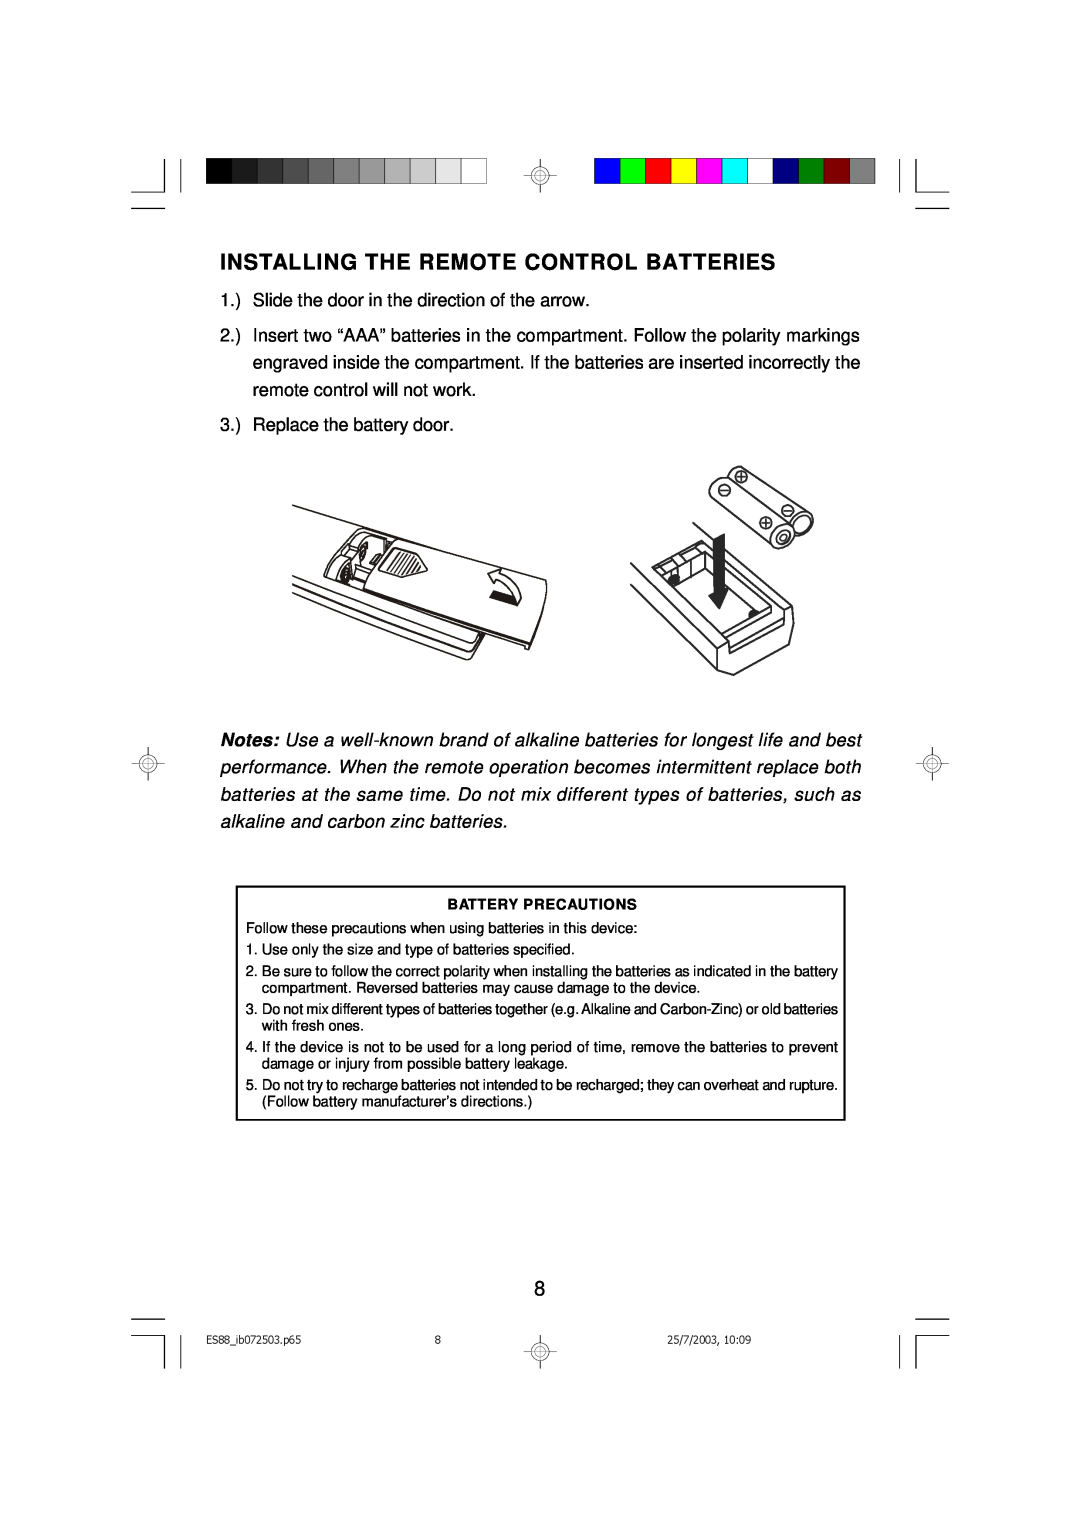 Emerson ES88 Installing The Remote Control Batteries, Slide the door in the direction of the arrow, Battery Precautions 